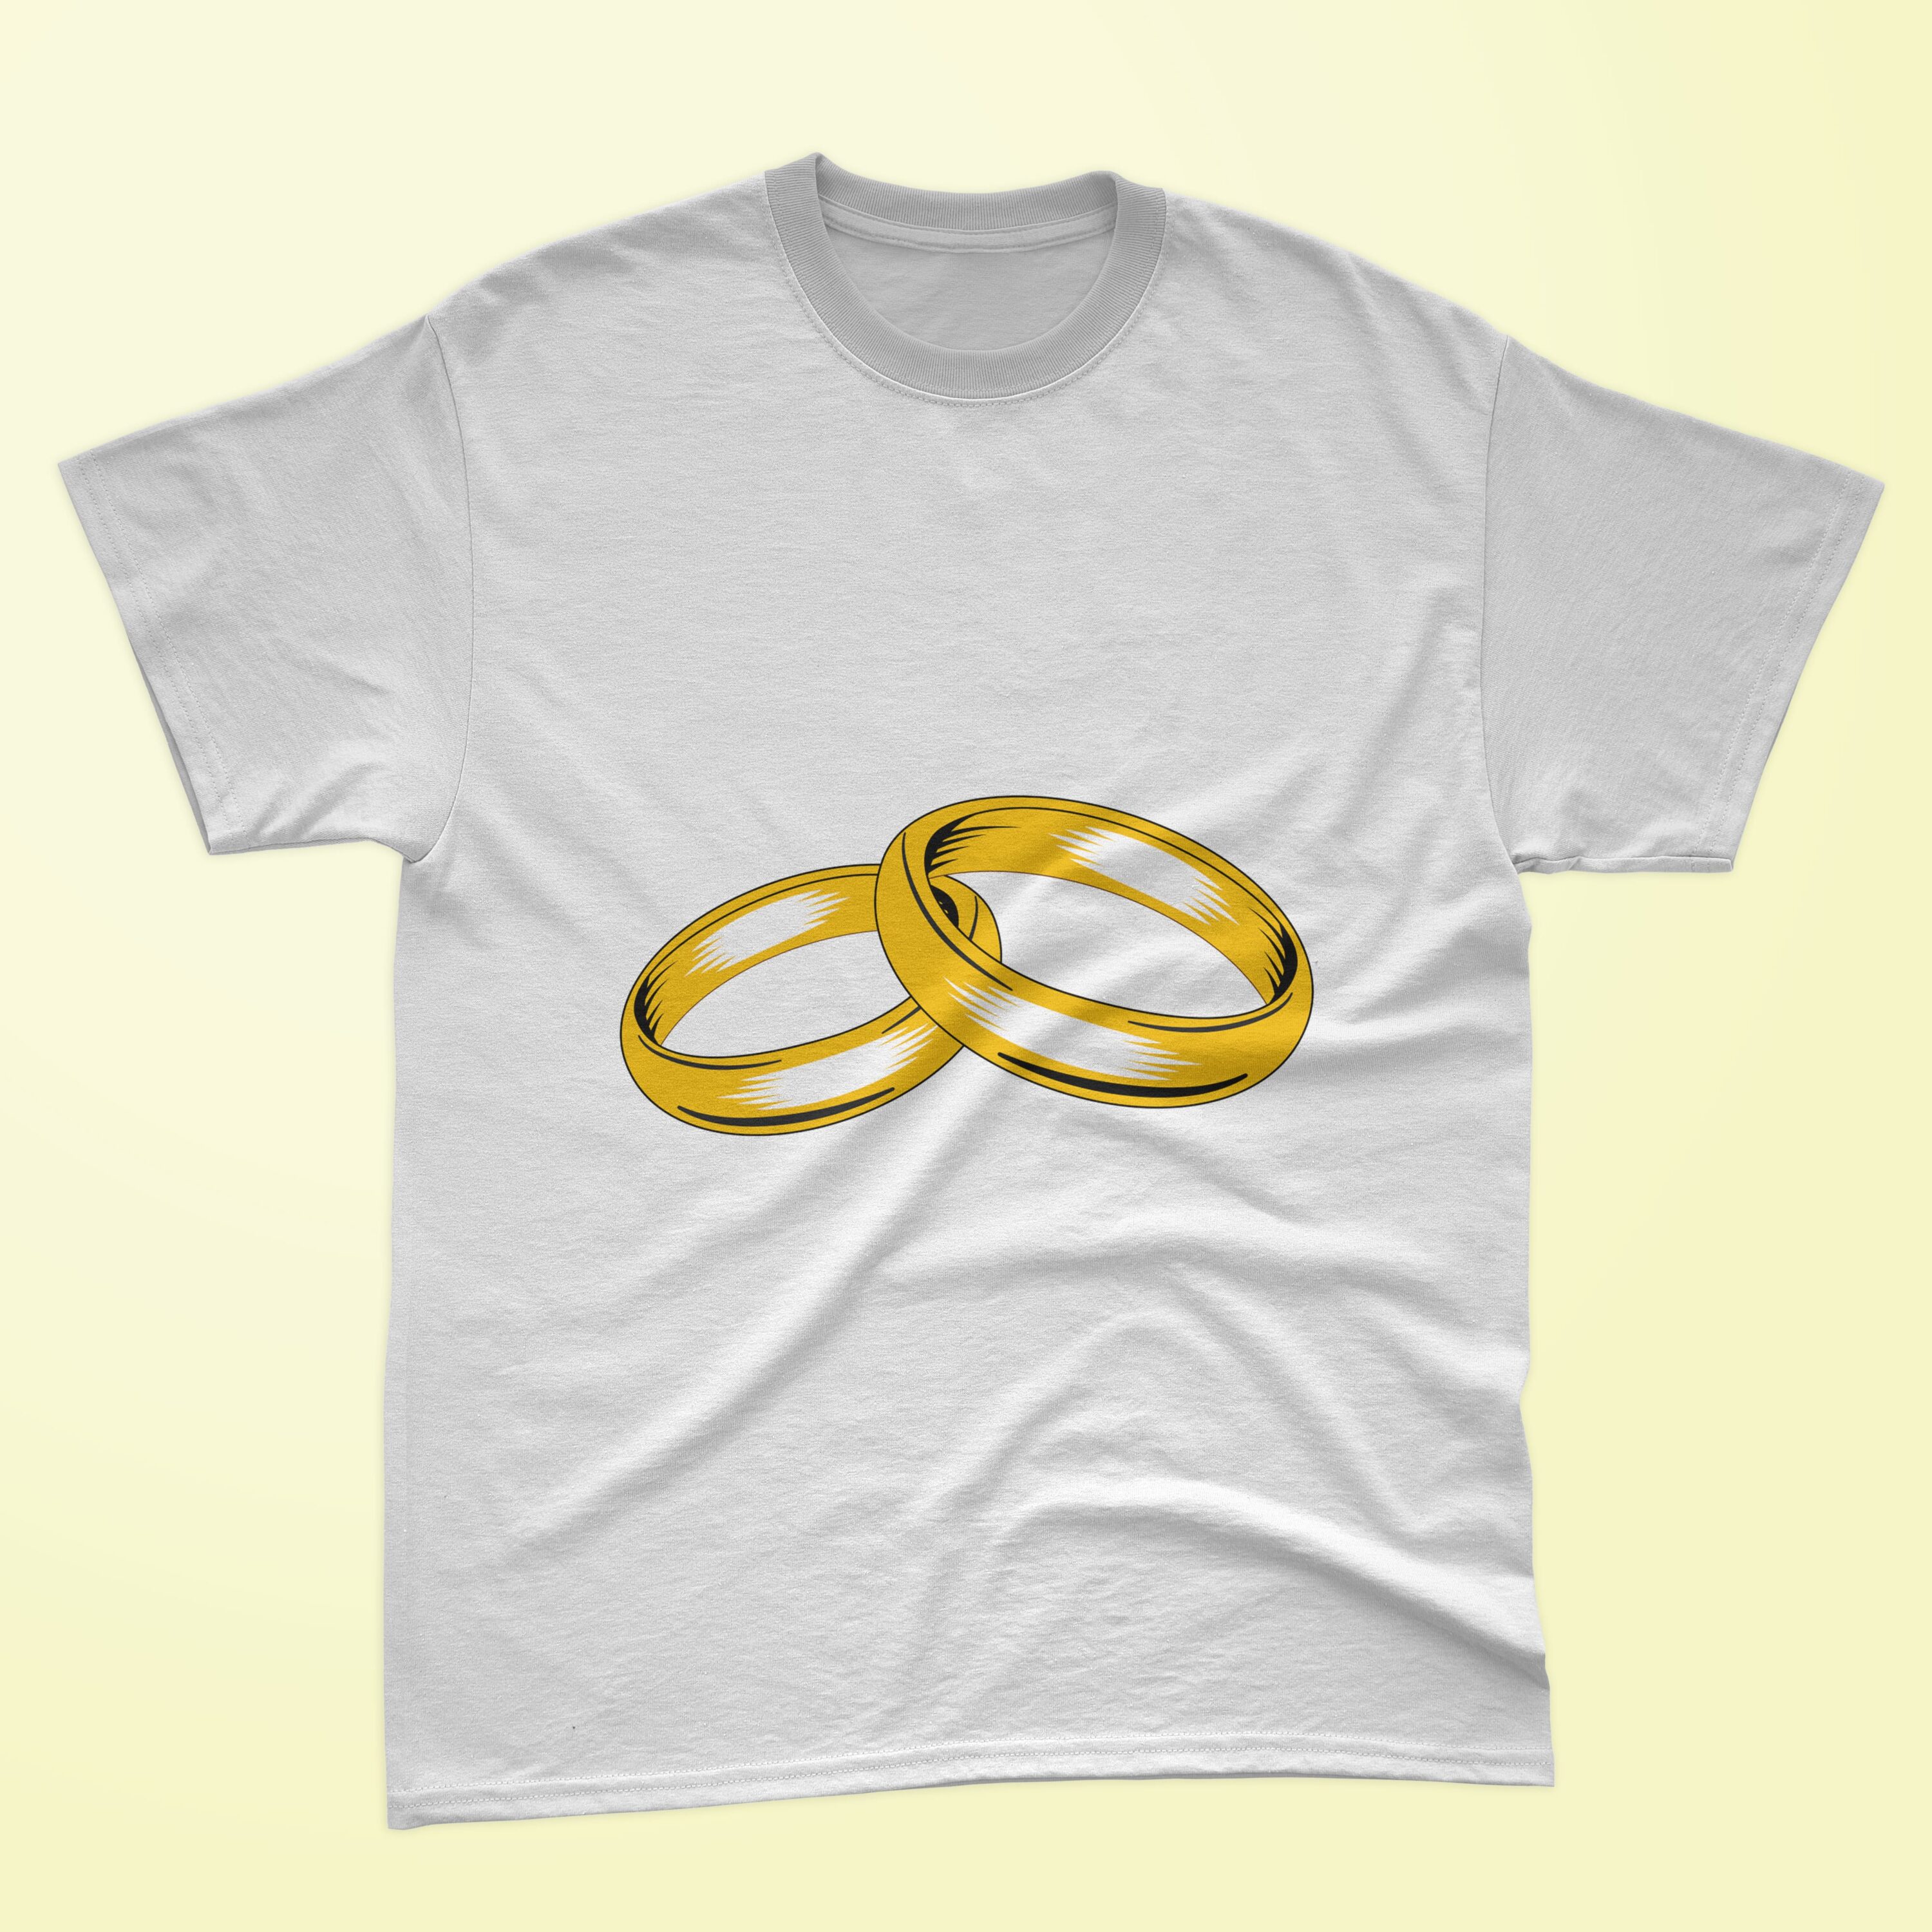 T-shirt image with a beautiful print of engagement rings.